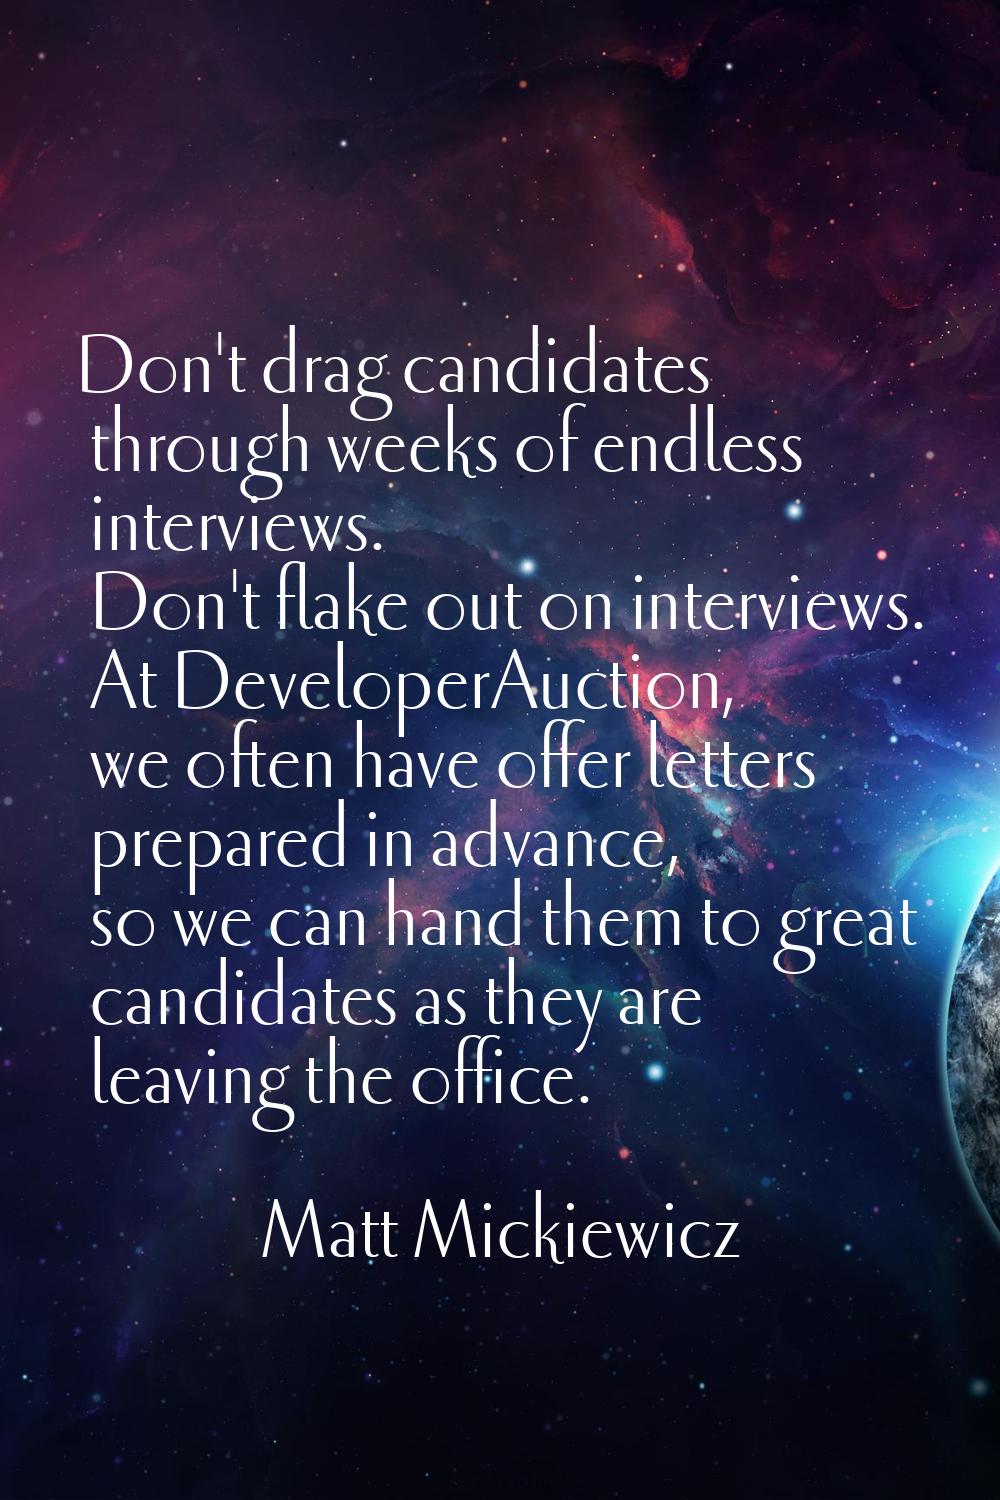 Don't drag candidates through weeks of endless interviews. Don't flake out on interviews. At Develo